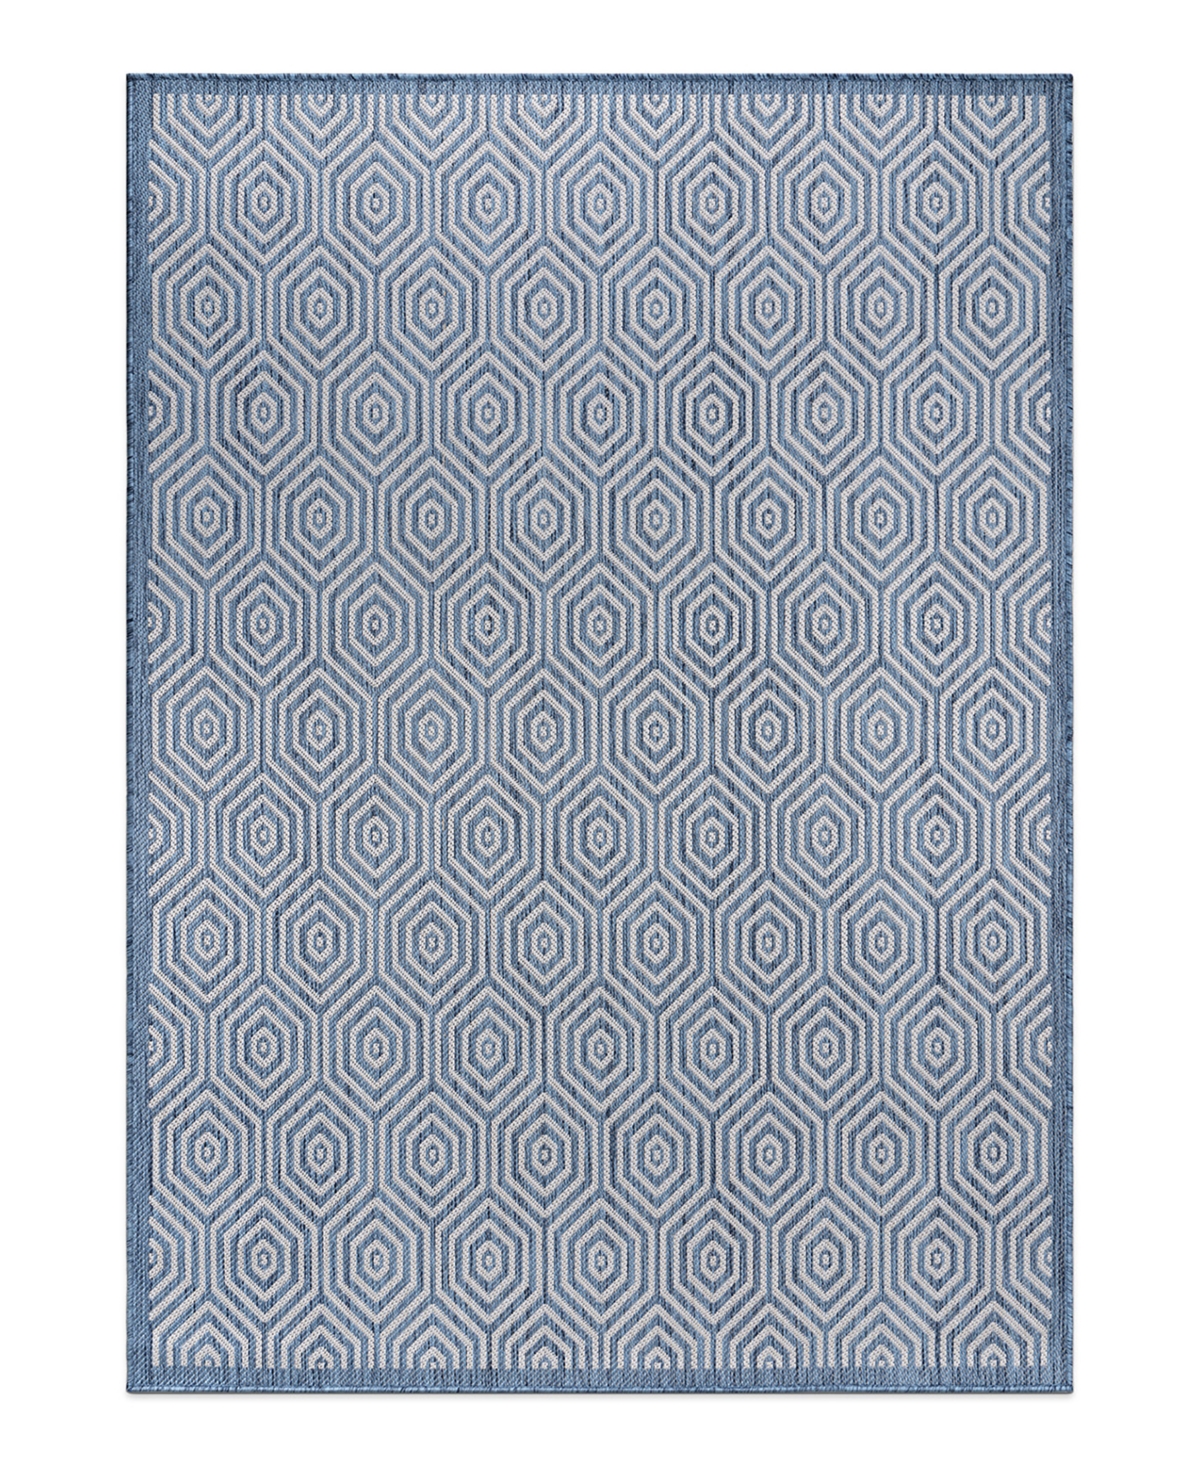 Main Street Rugs Bays Outdoor 120 5' X 7' Area Rug In Blue